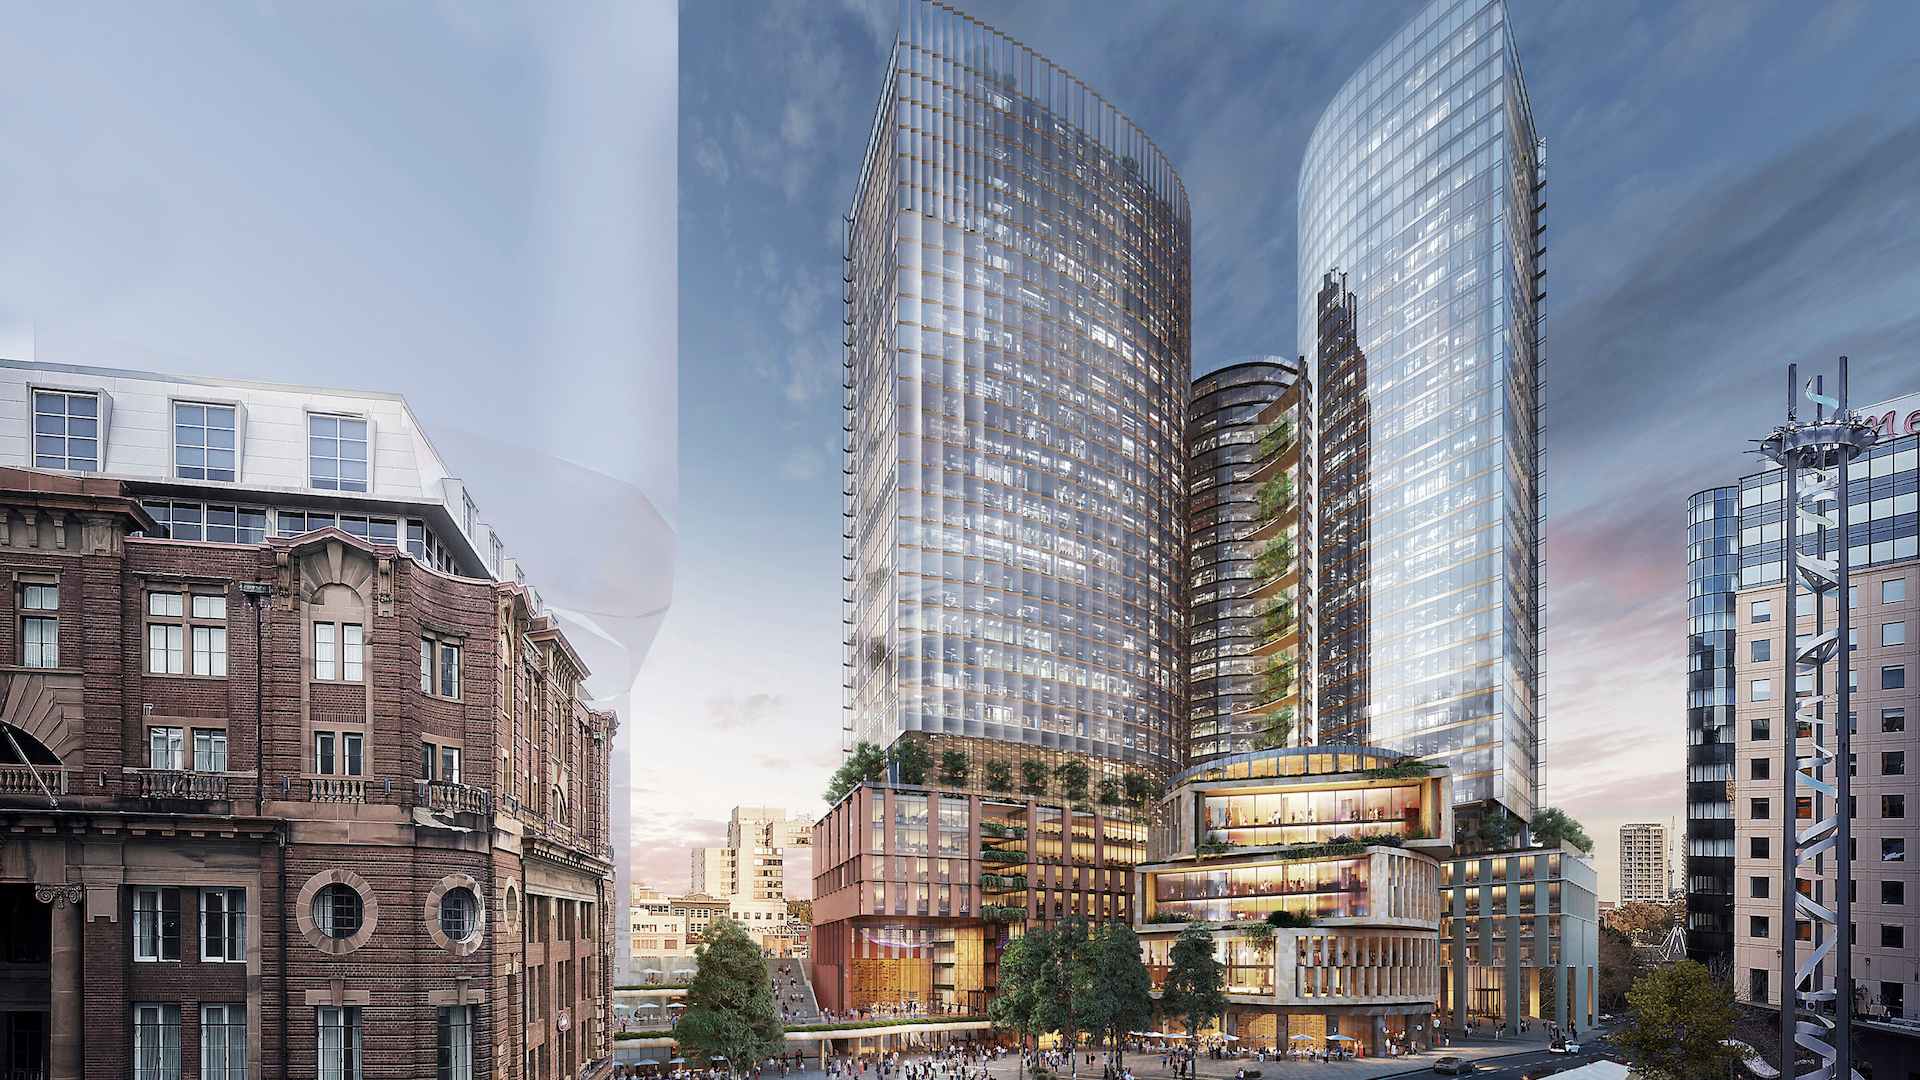 Sydney's Central Station Will Soon Be Home to Three Sky-High Towers As Part of Its New Tech Hub